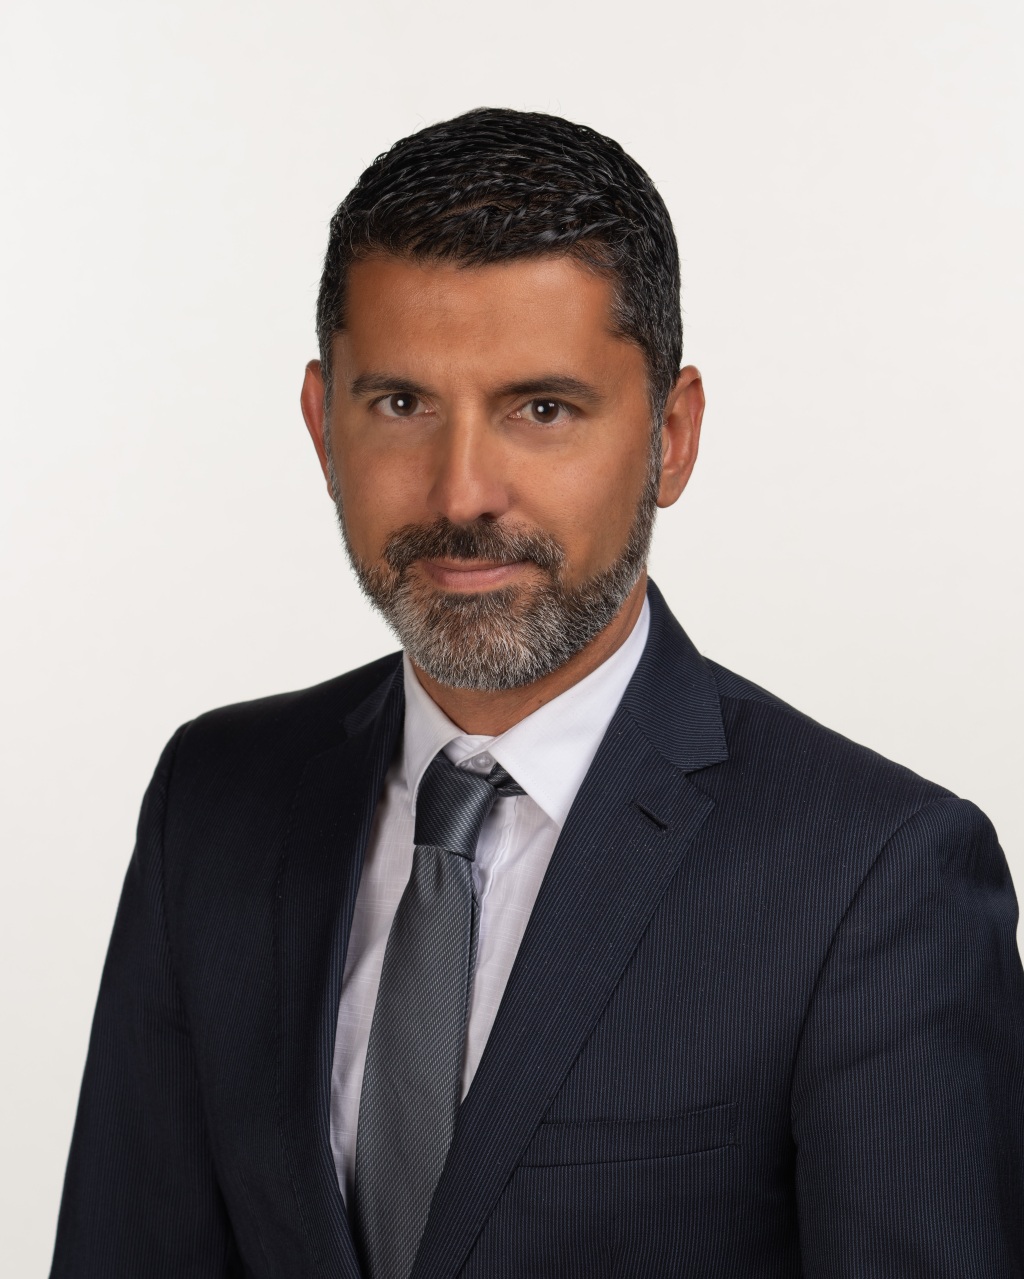 DAZN Restructures Leadership. Shay Segev is Now the Sole CEO